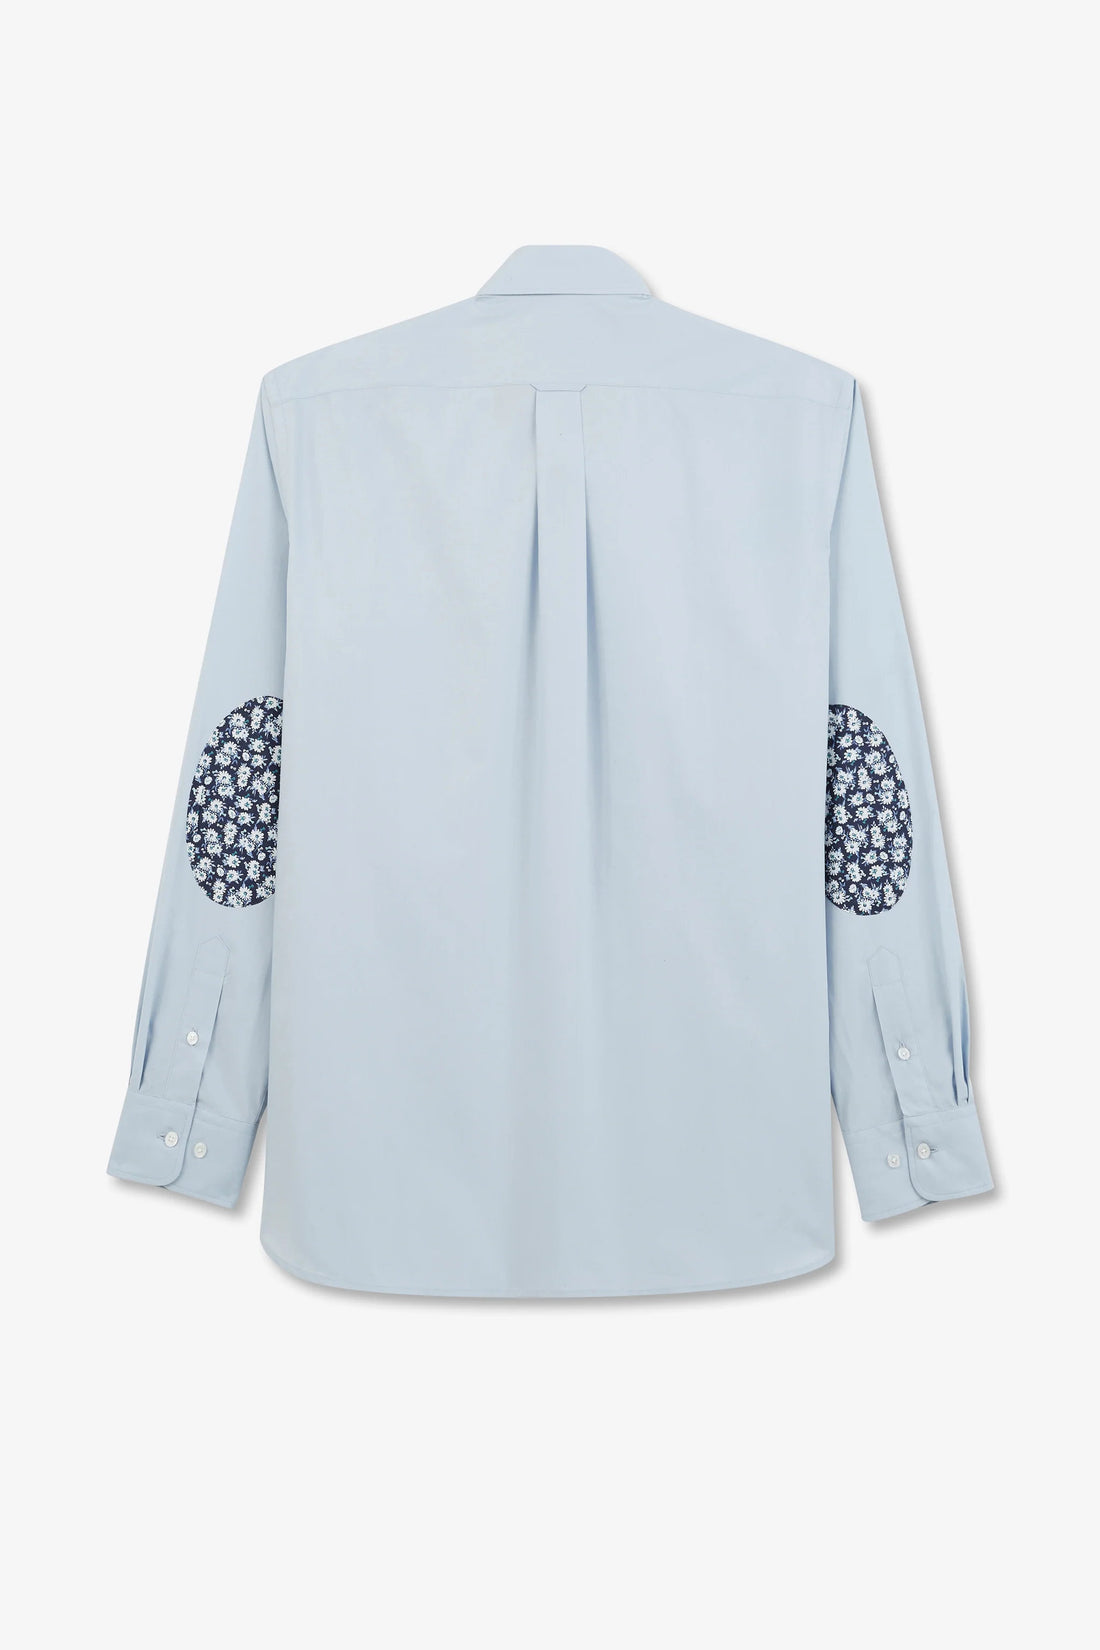 Light Blue Shirt With Floral Elbow Patches_E24CHECL0004_BLC6_02